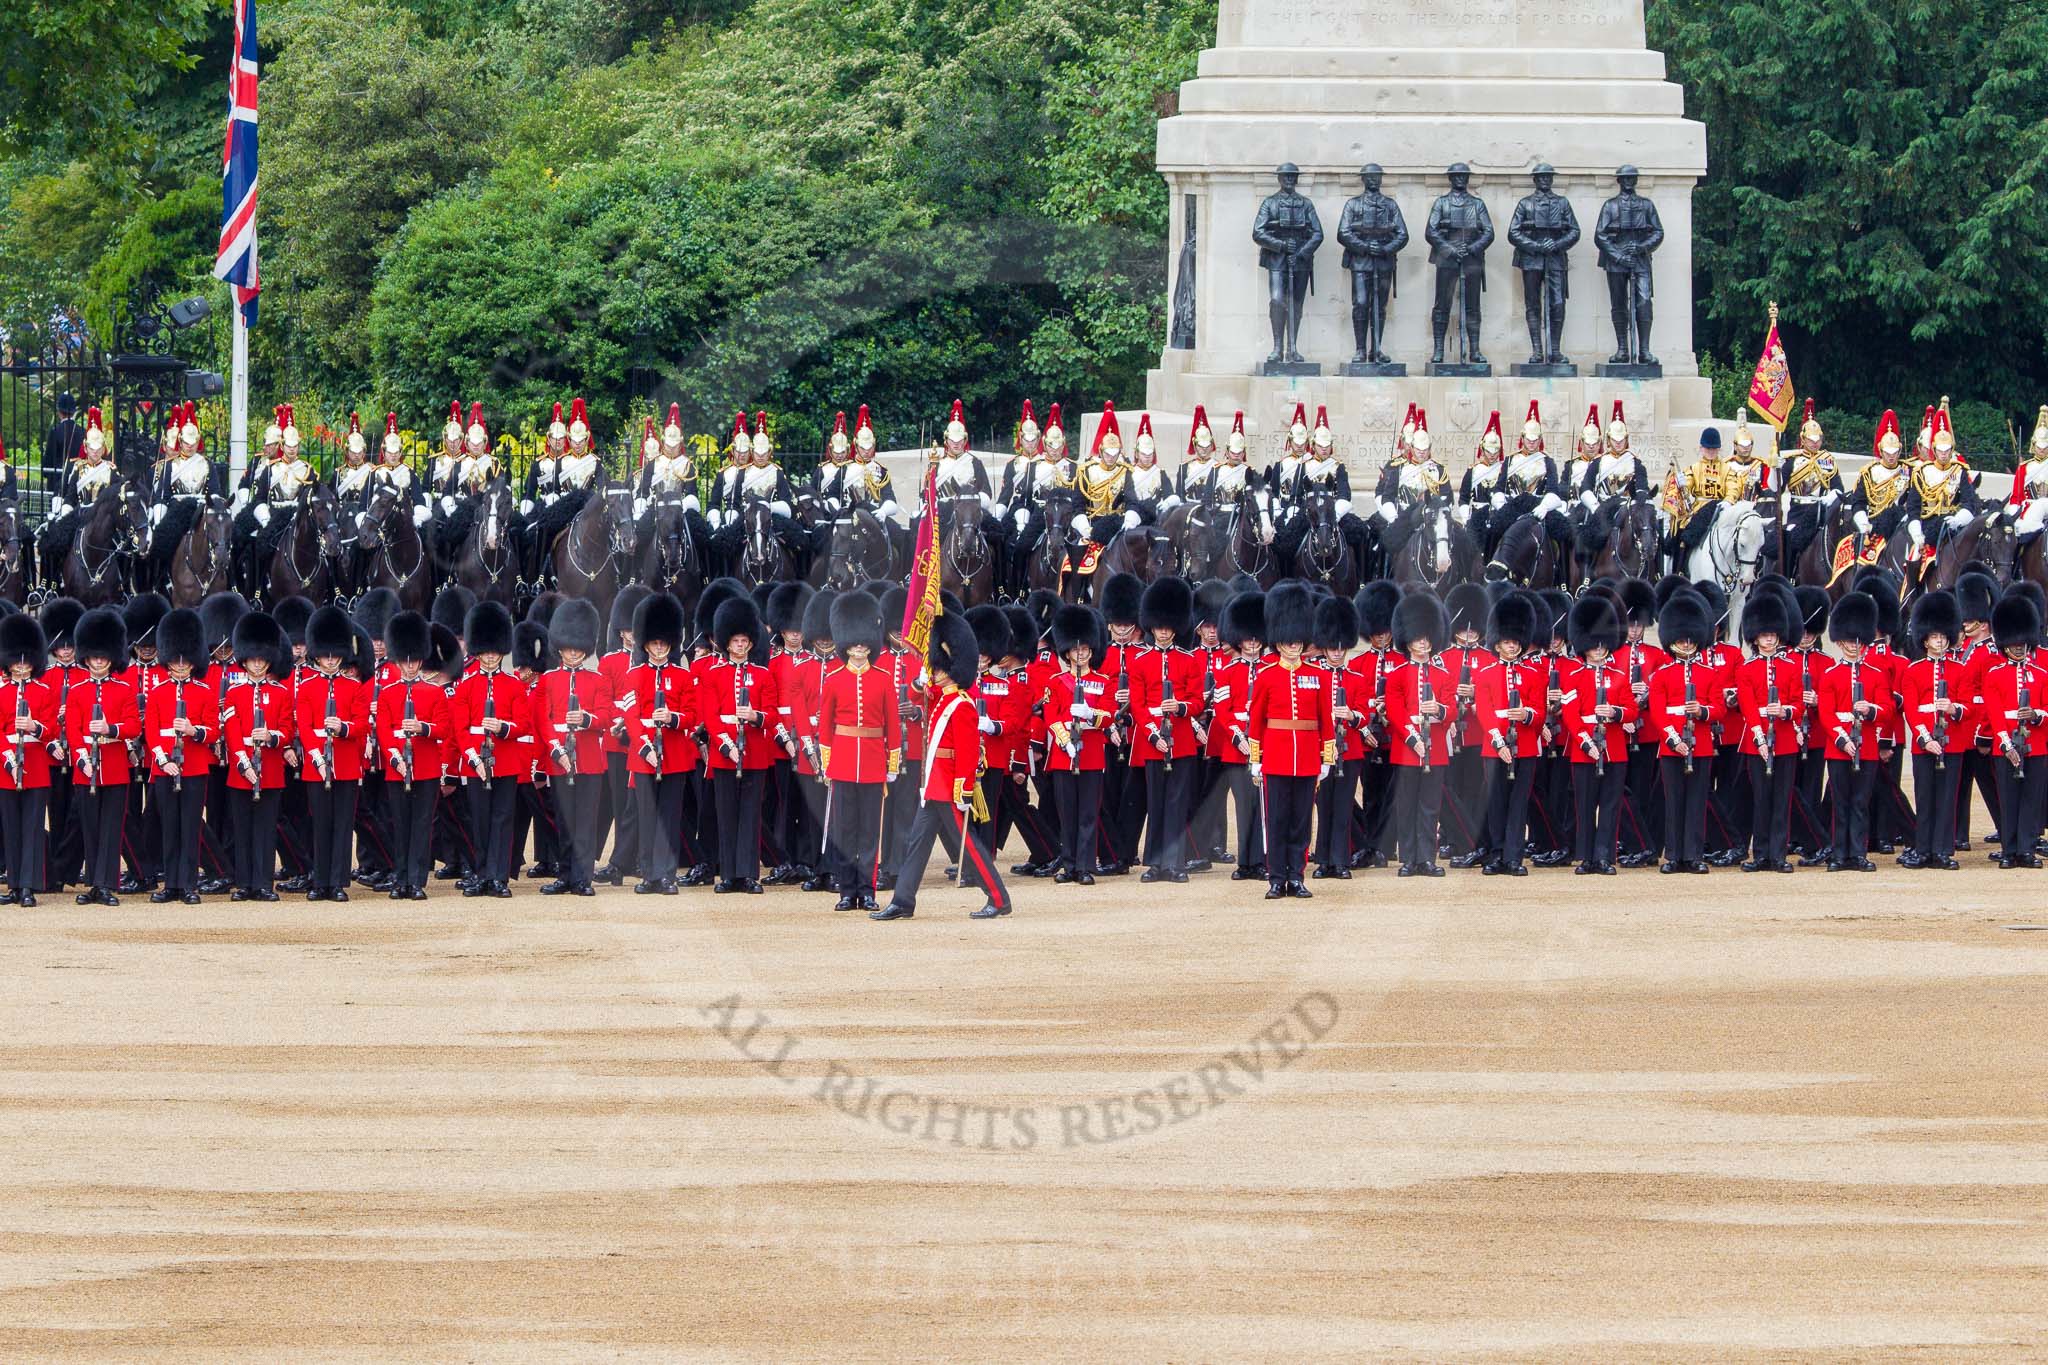 Trooping the Colour 2014.
Horse Guards Parade, Westminster,
London SW1A,

United Kingdom,
on 14 June 2014 at 11:28, image #572